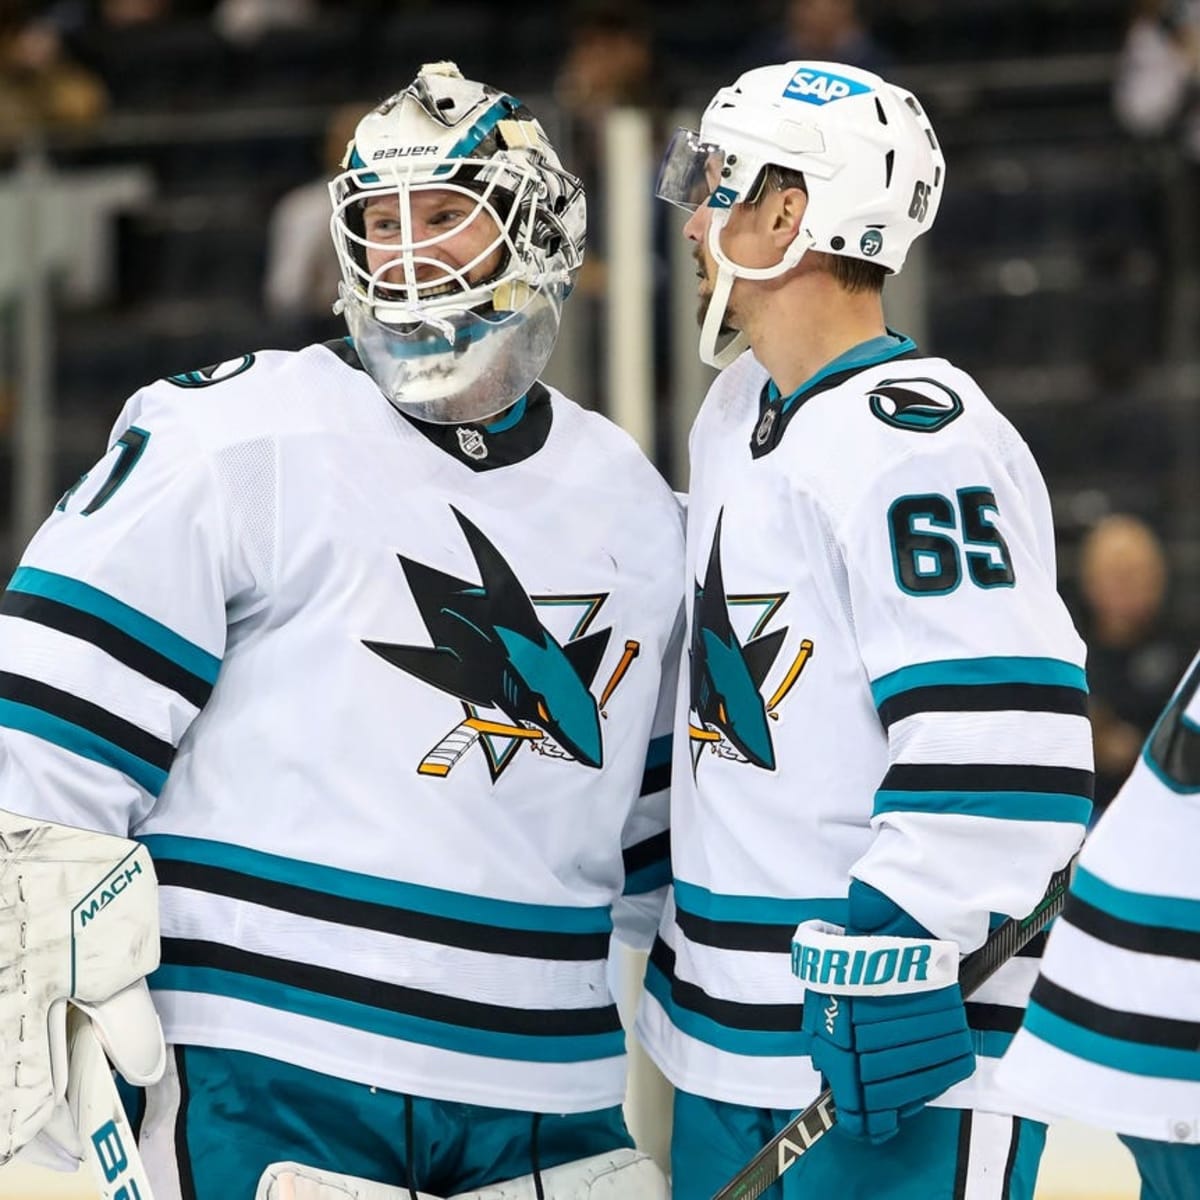 Sharks vs. Devils live stream: TV channel, how to watch